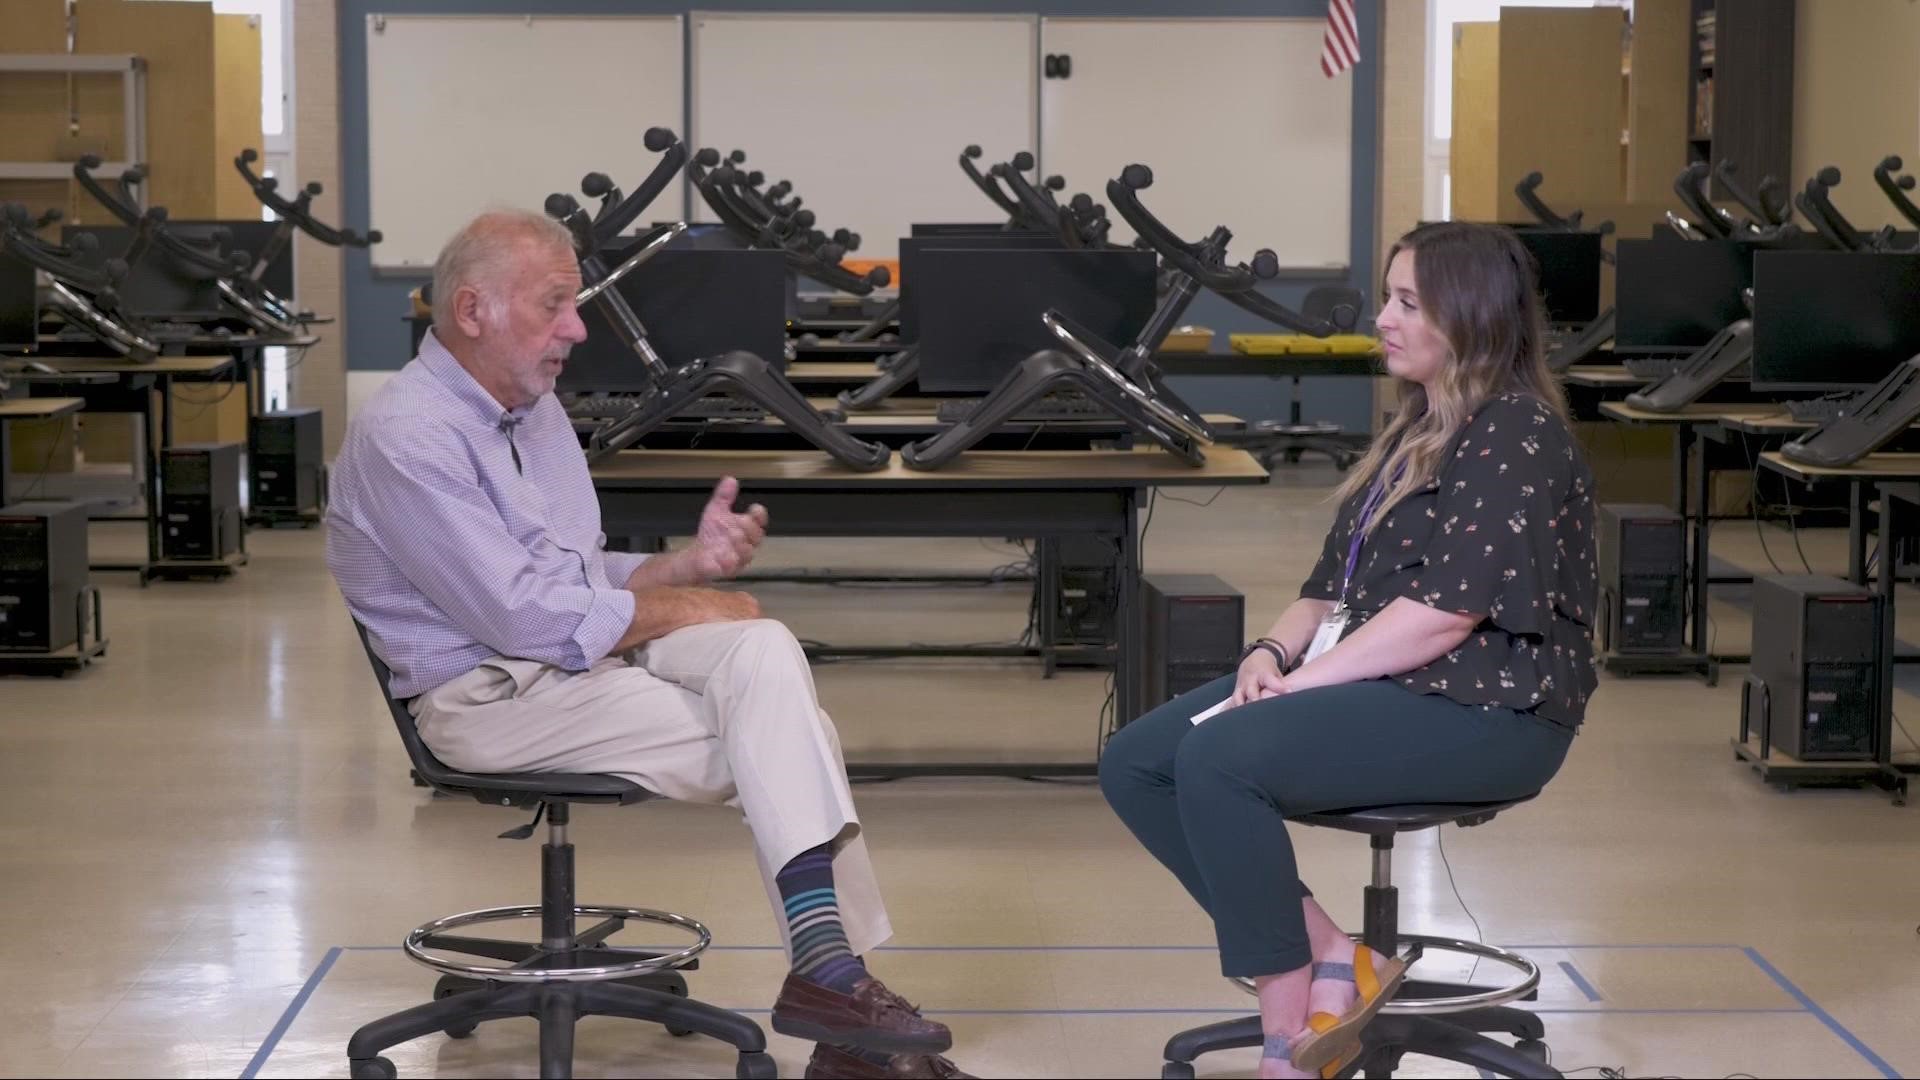 Bob Sedlak is retiring after this year. Kellie Martin is starting her first year. We got them together to chat about expectations for the new school year.